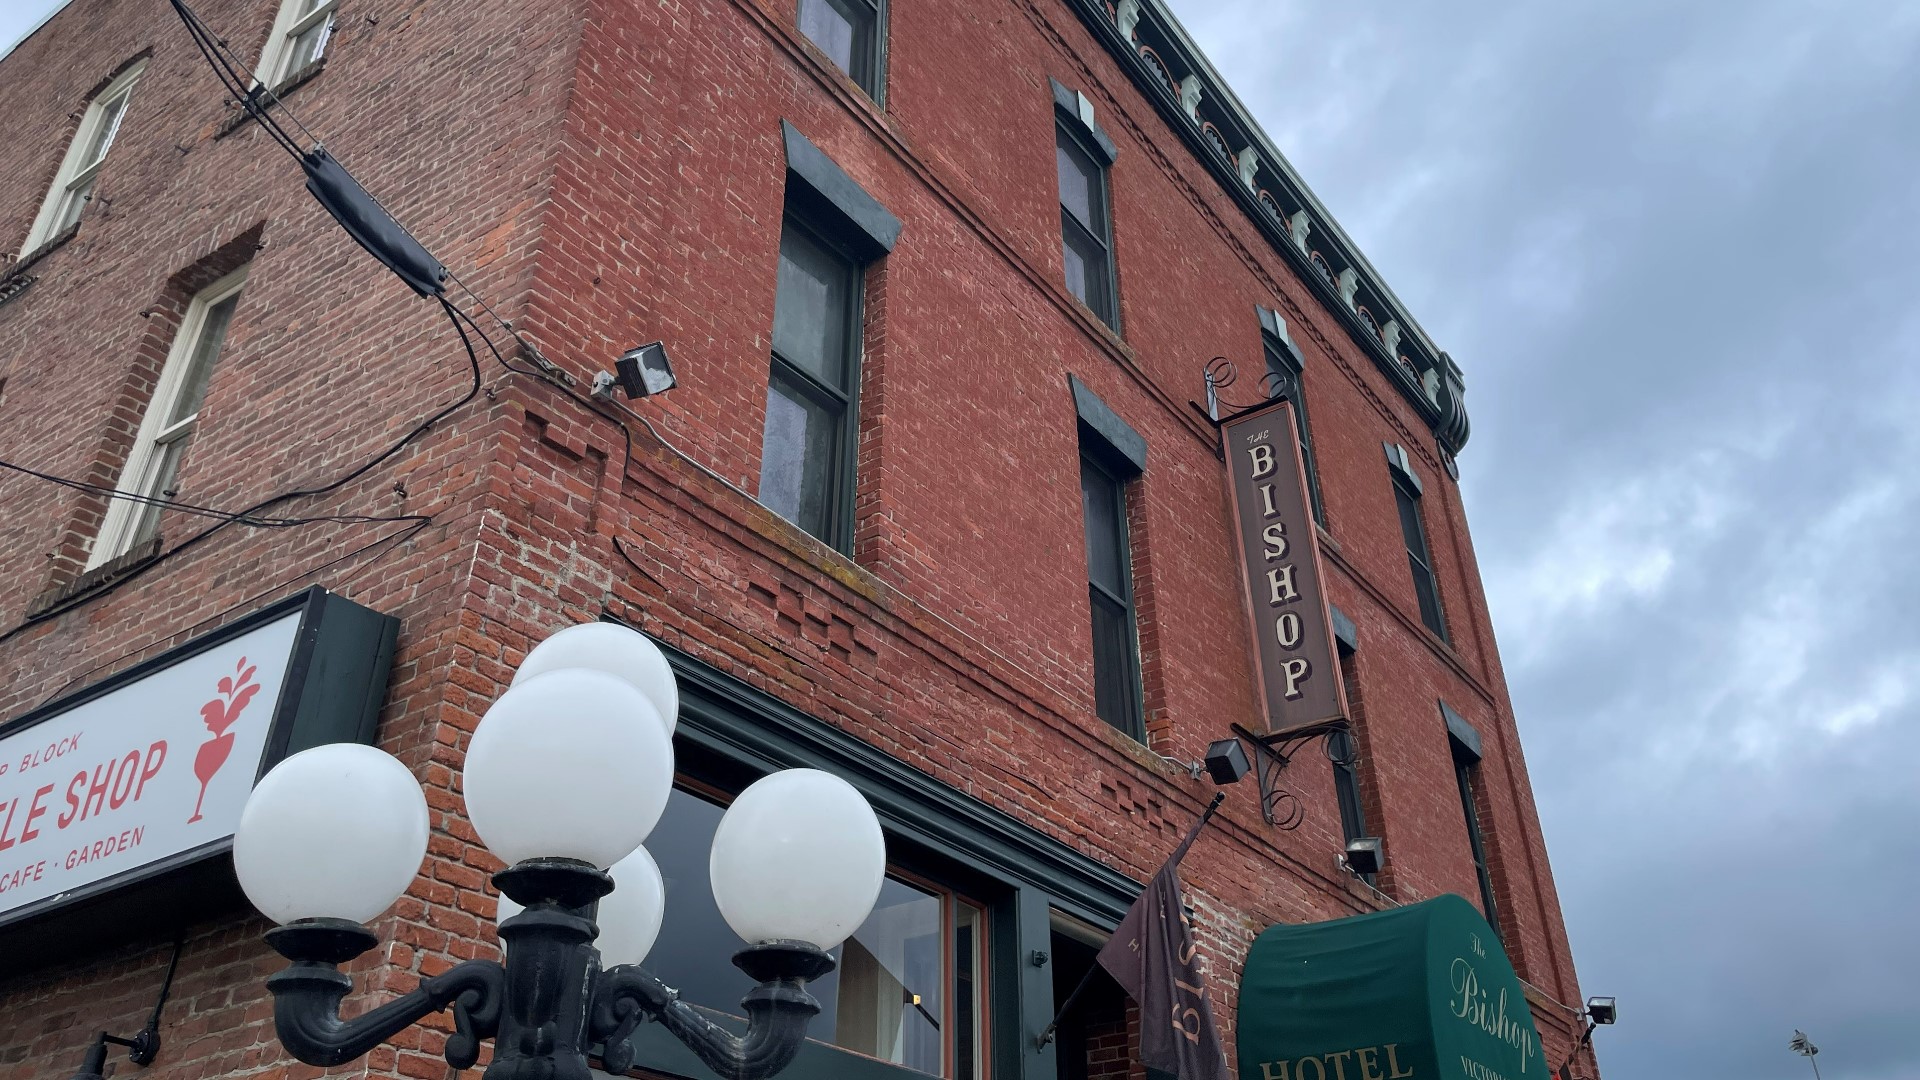 The Bishop Hotel in Port Townsend is winner of Best Boutique Hotel in 2023's Best of Western Washington viewers poll. #k5evening